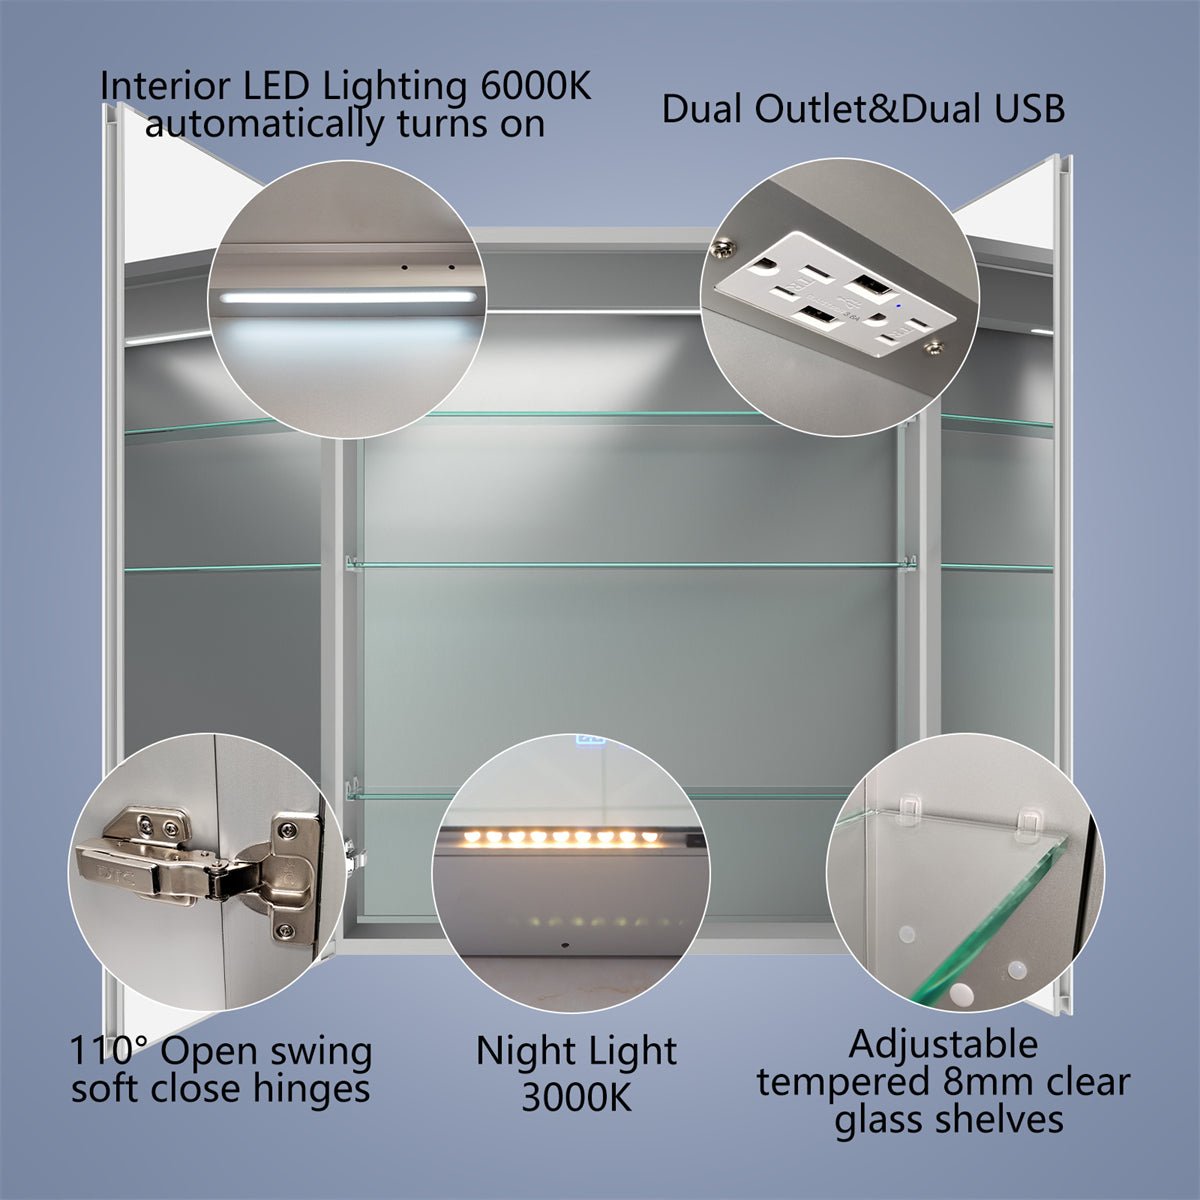 Boost-M2 30" W x 36" H Bathroom Light Medicine Cabinets Recessed or Surface Defogger, Dimmer, Clock，Outlets & USB